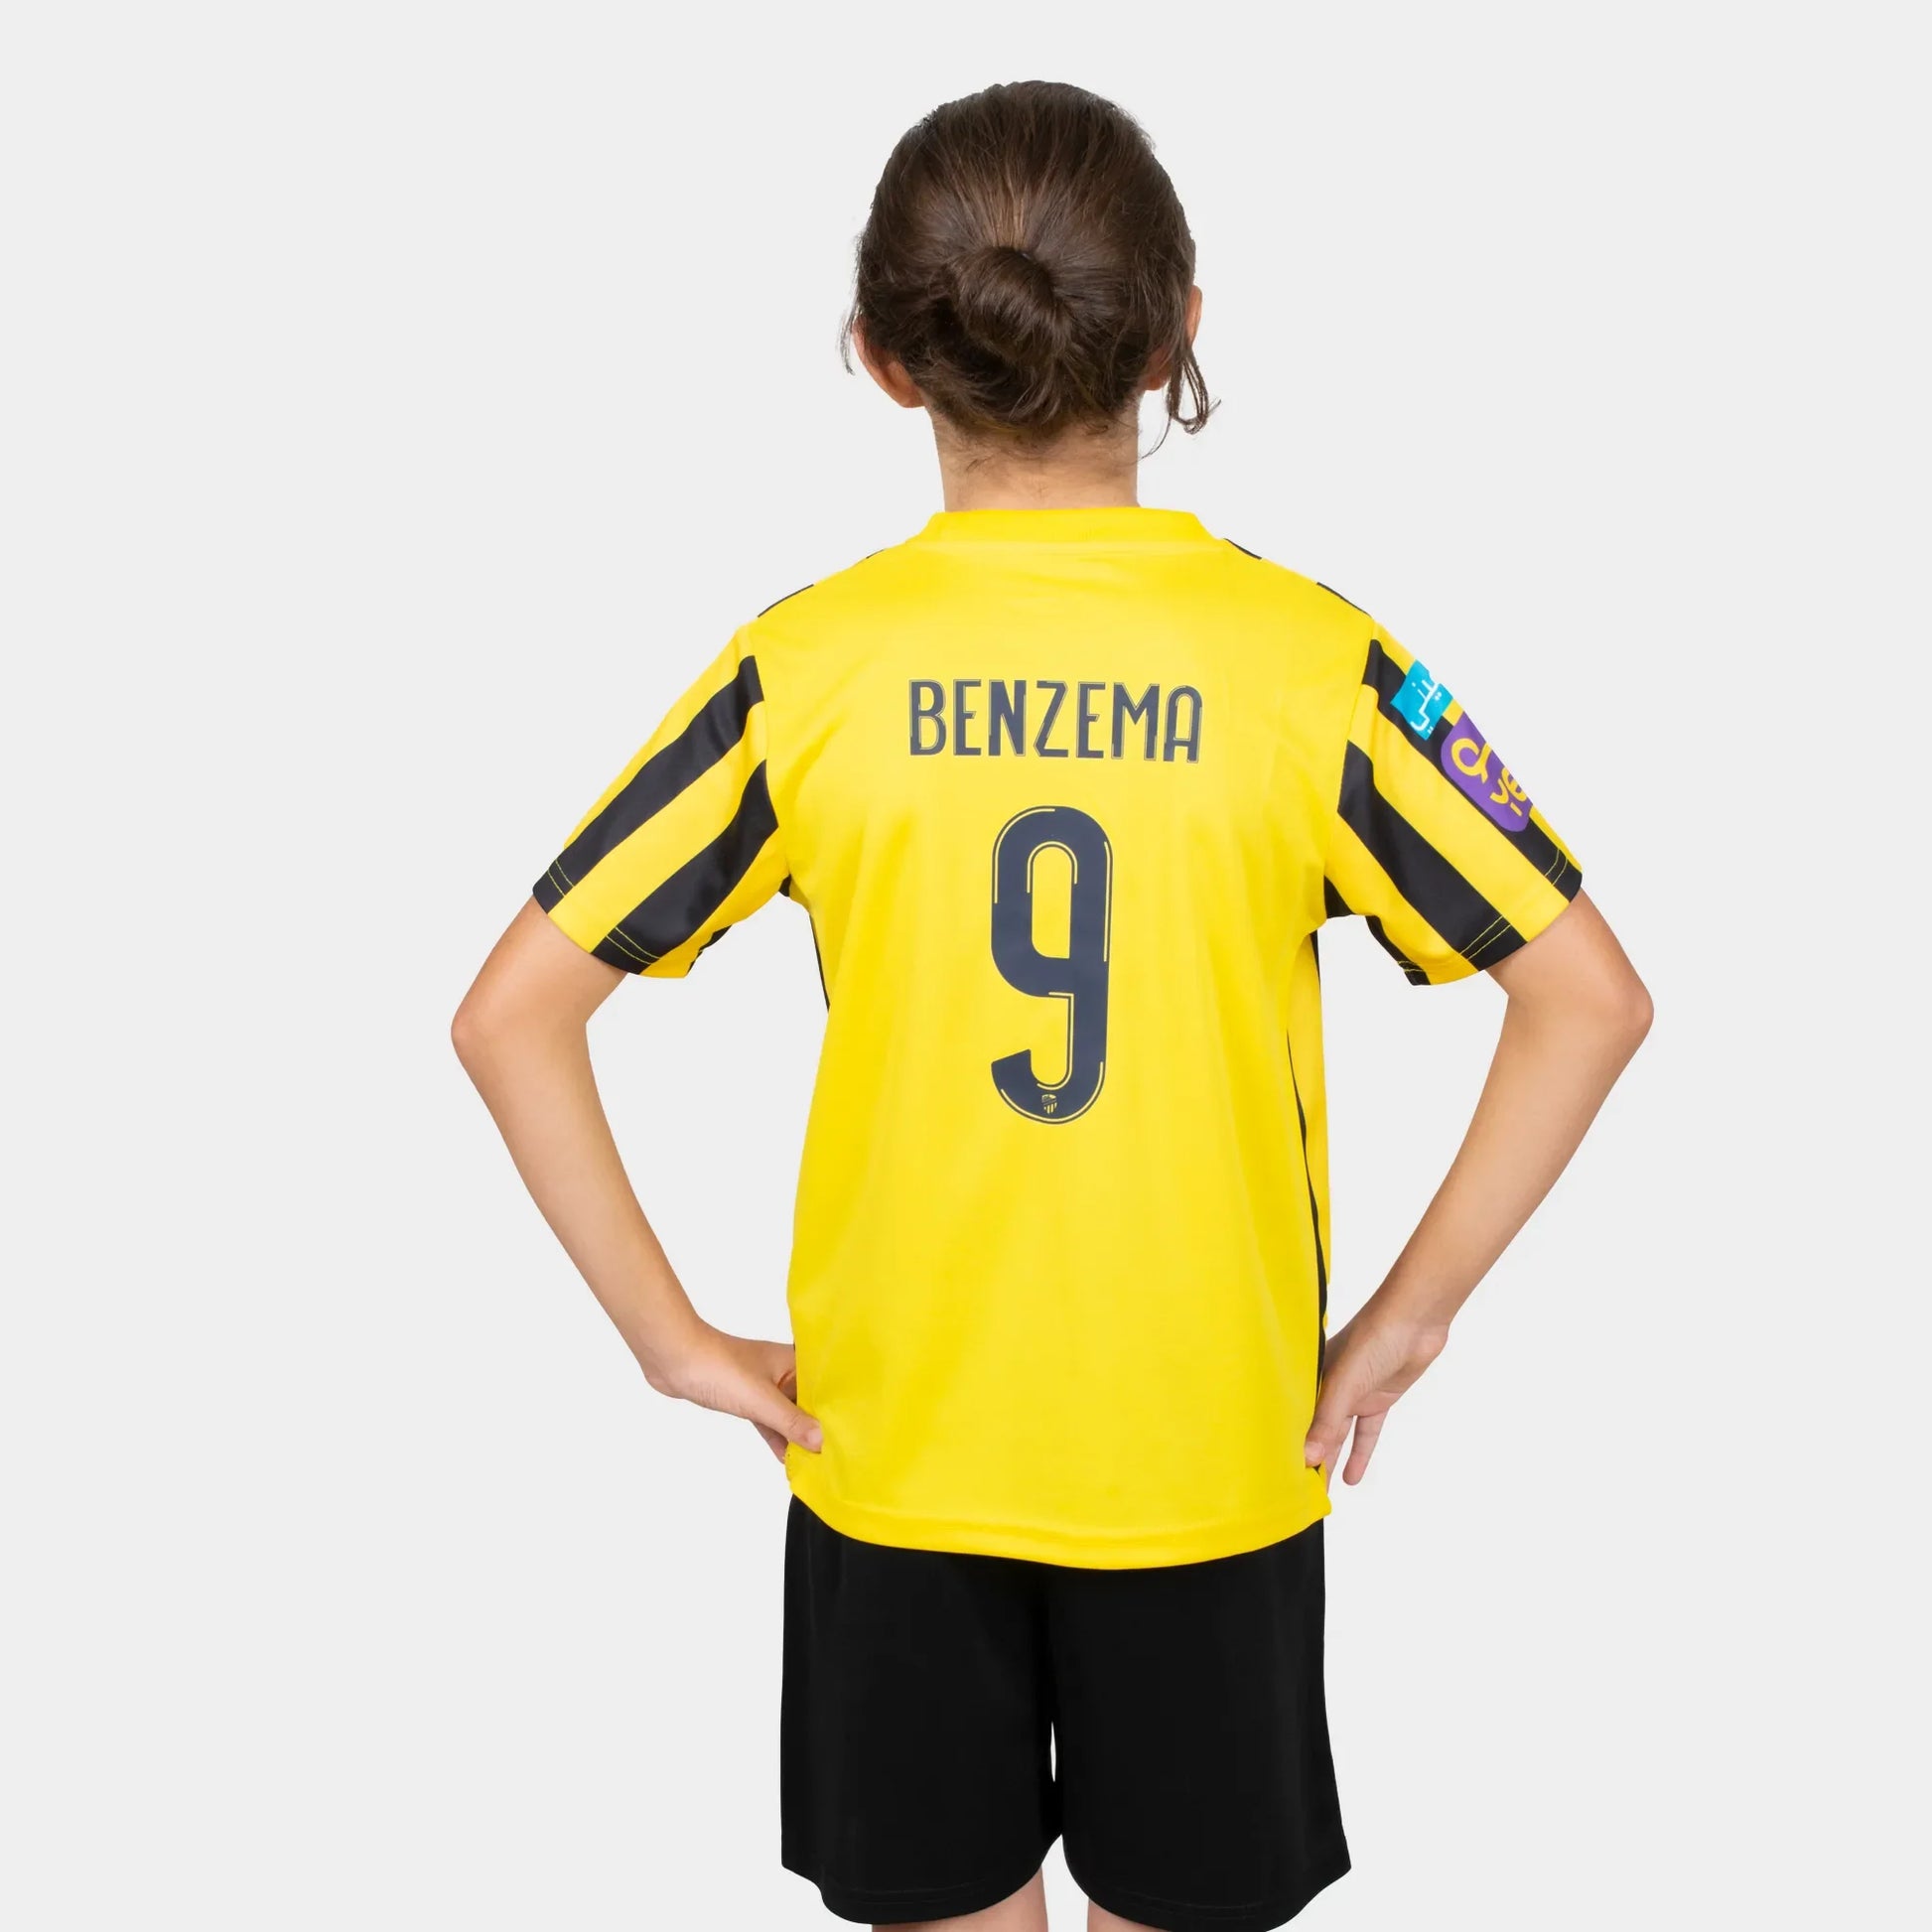 Al Ittihad Fc Kids Kit Home Season 23/24 Designed By Mitani Store , Regular Fit Jersey Short Sleeves And Round Neck Collar In Yellow Color with Benzema Name and Number 9